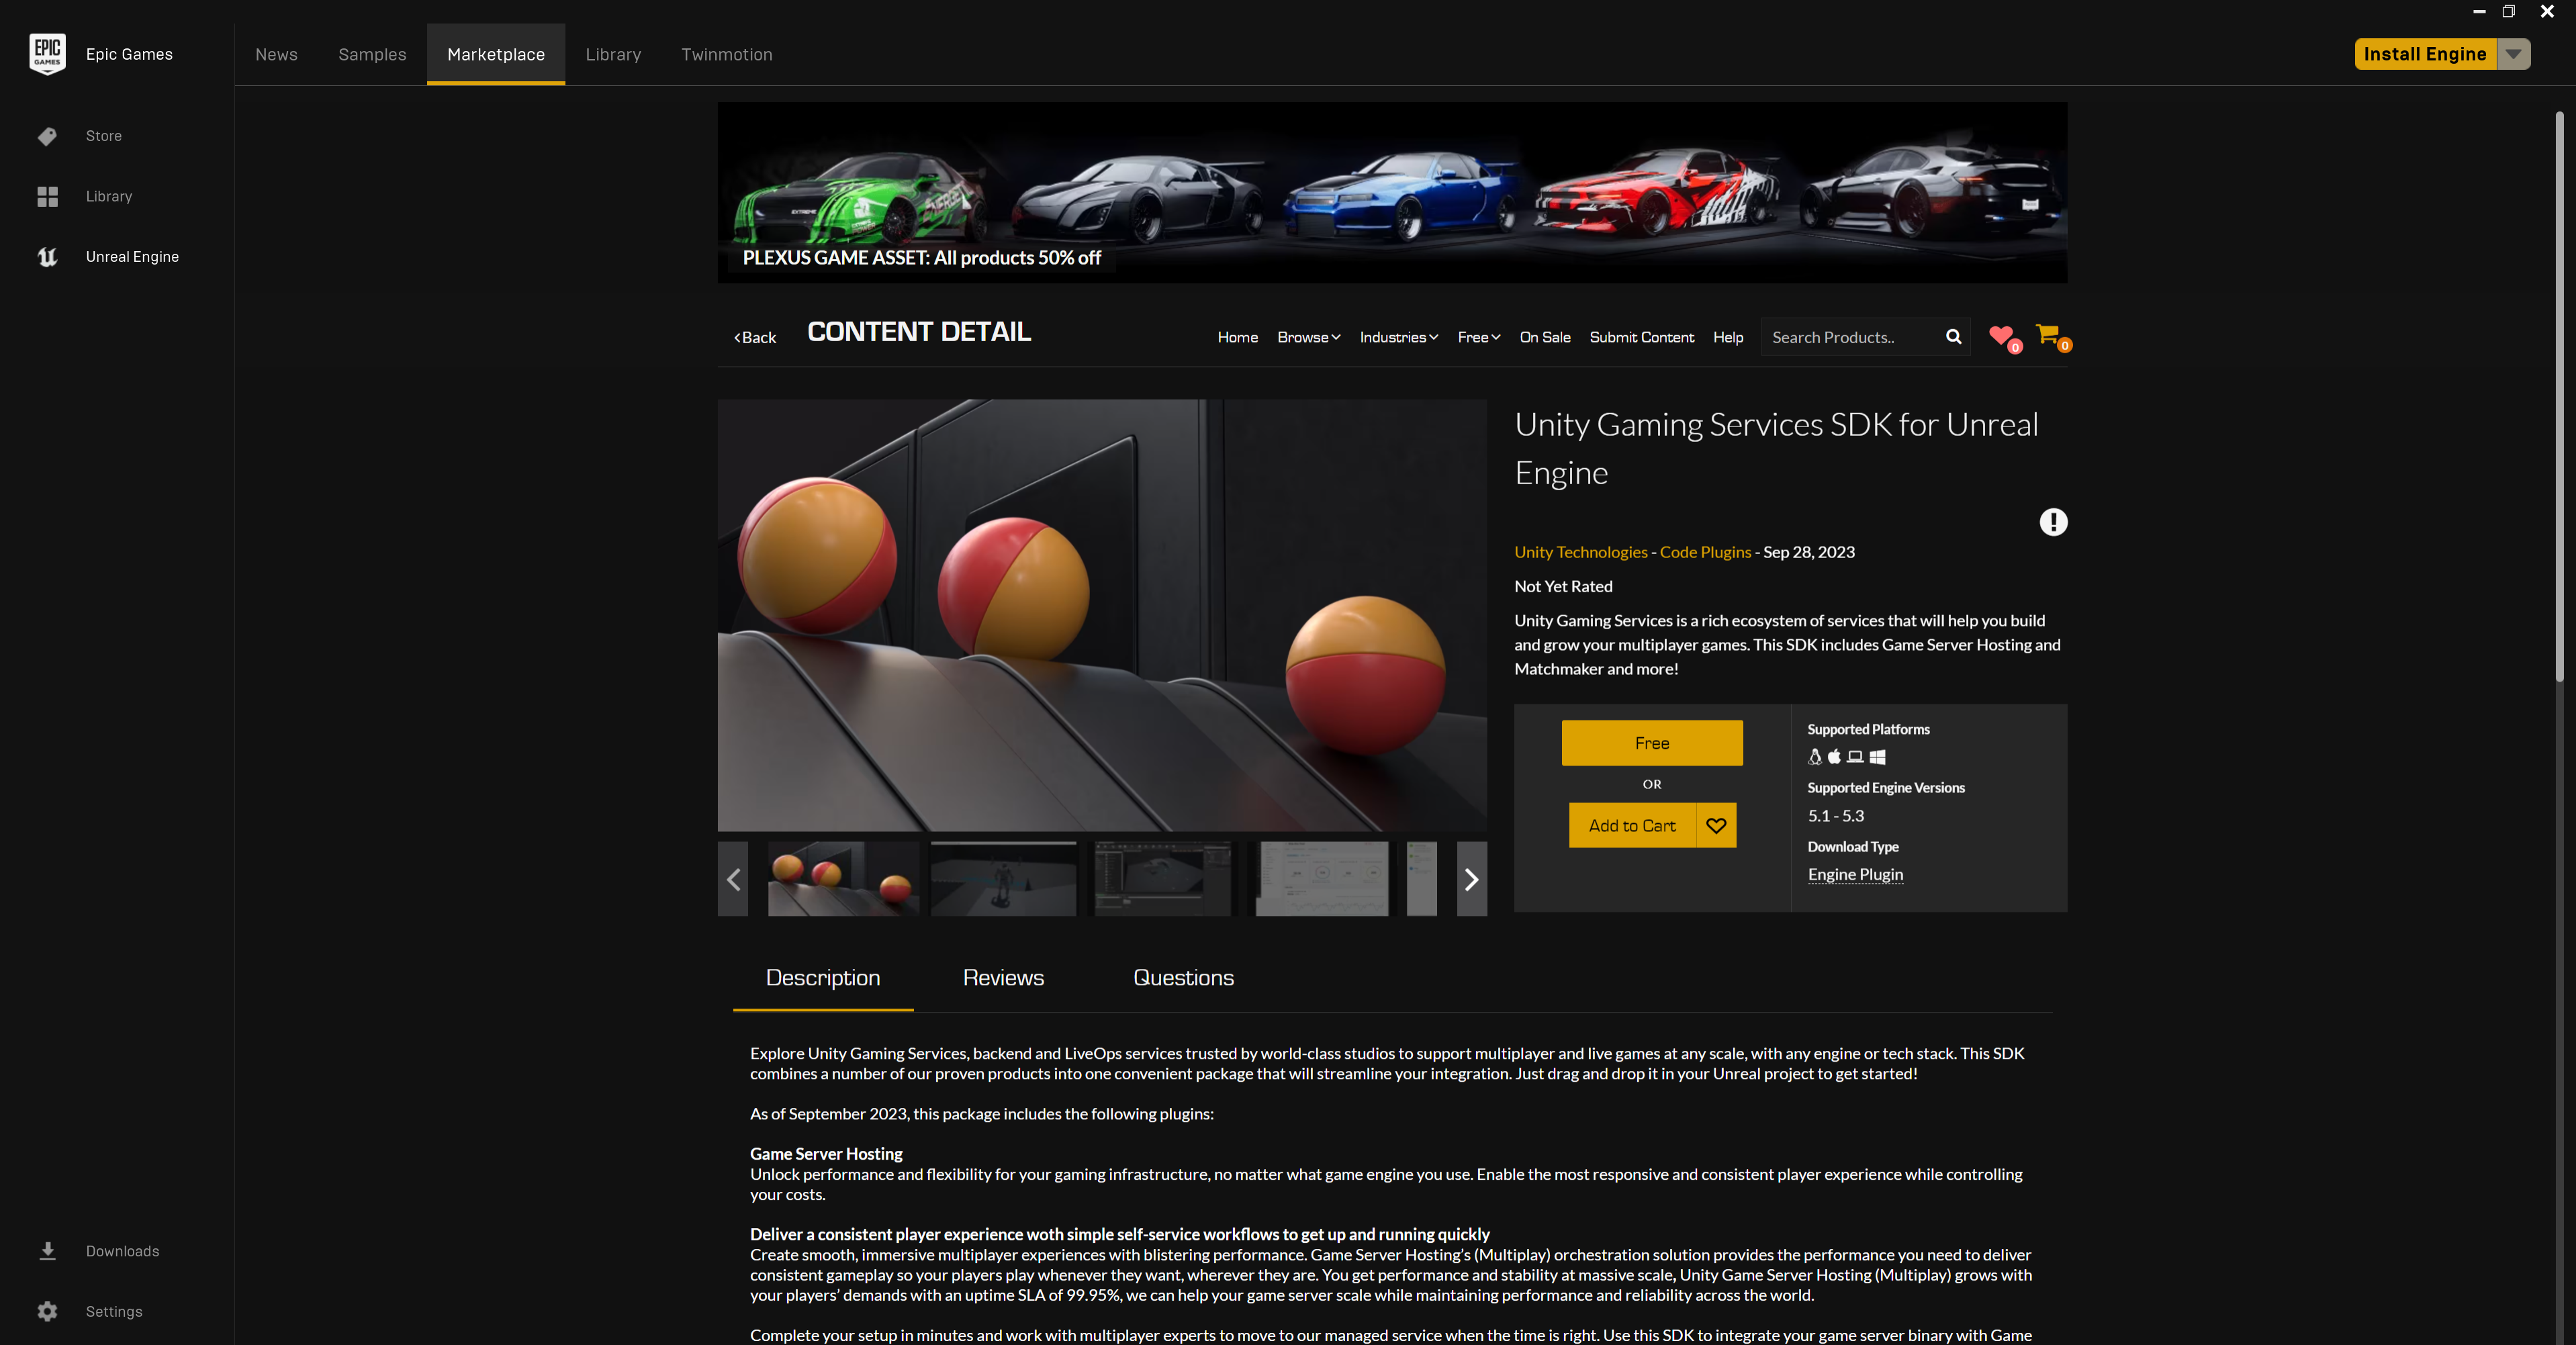 Unity Gaming Services SDK for Unreal Engine Launcher page